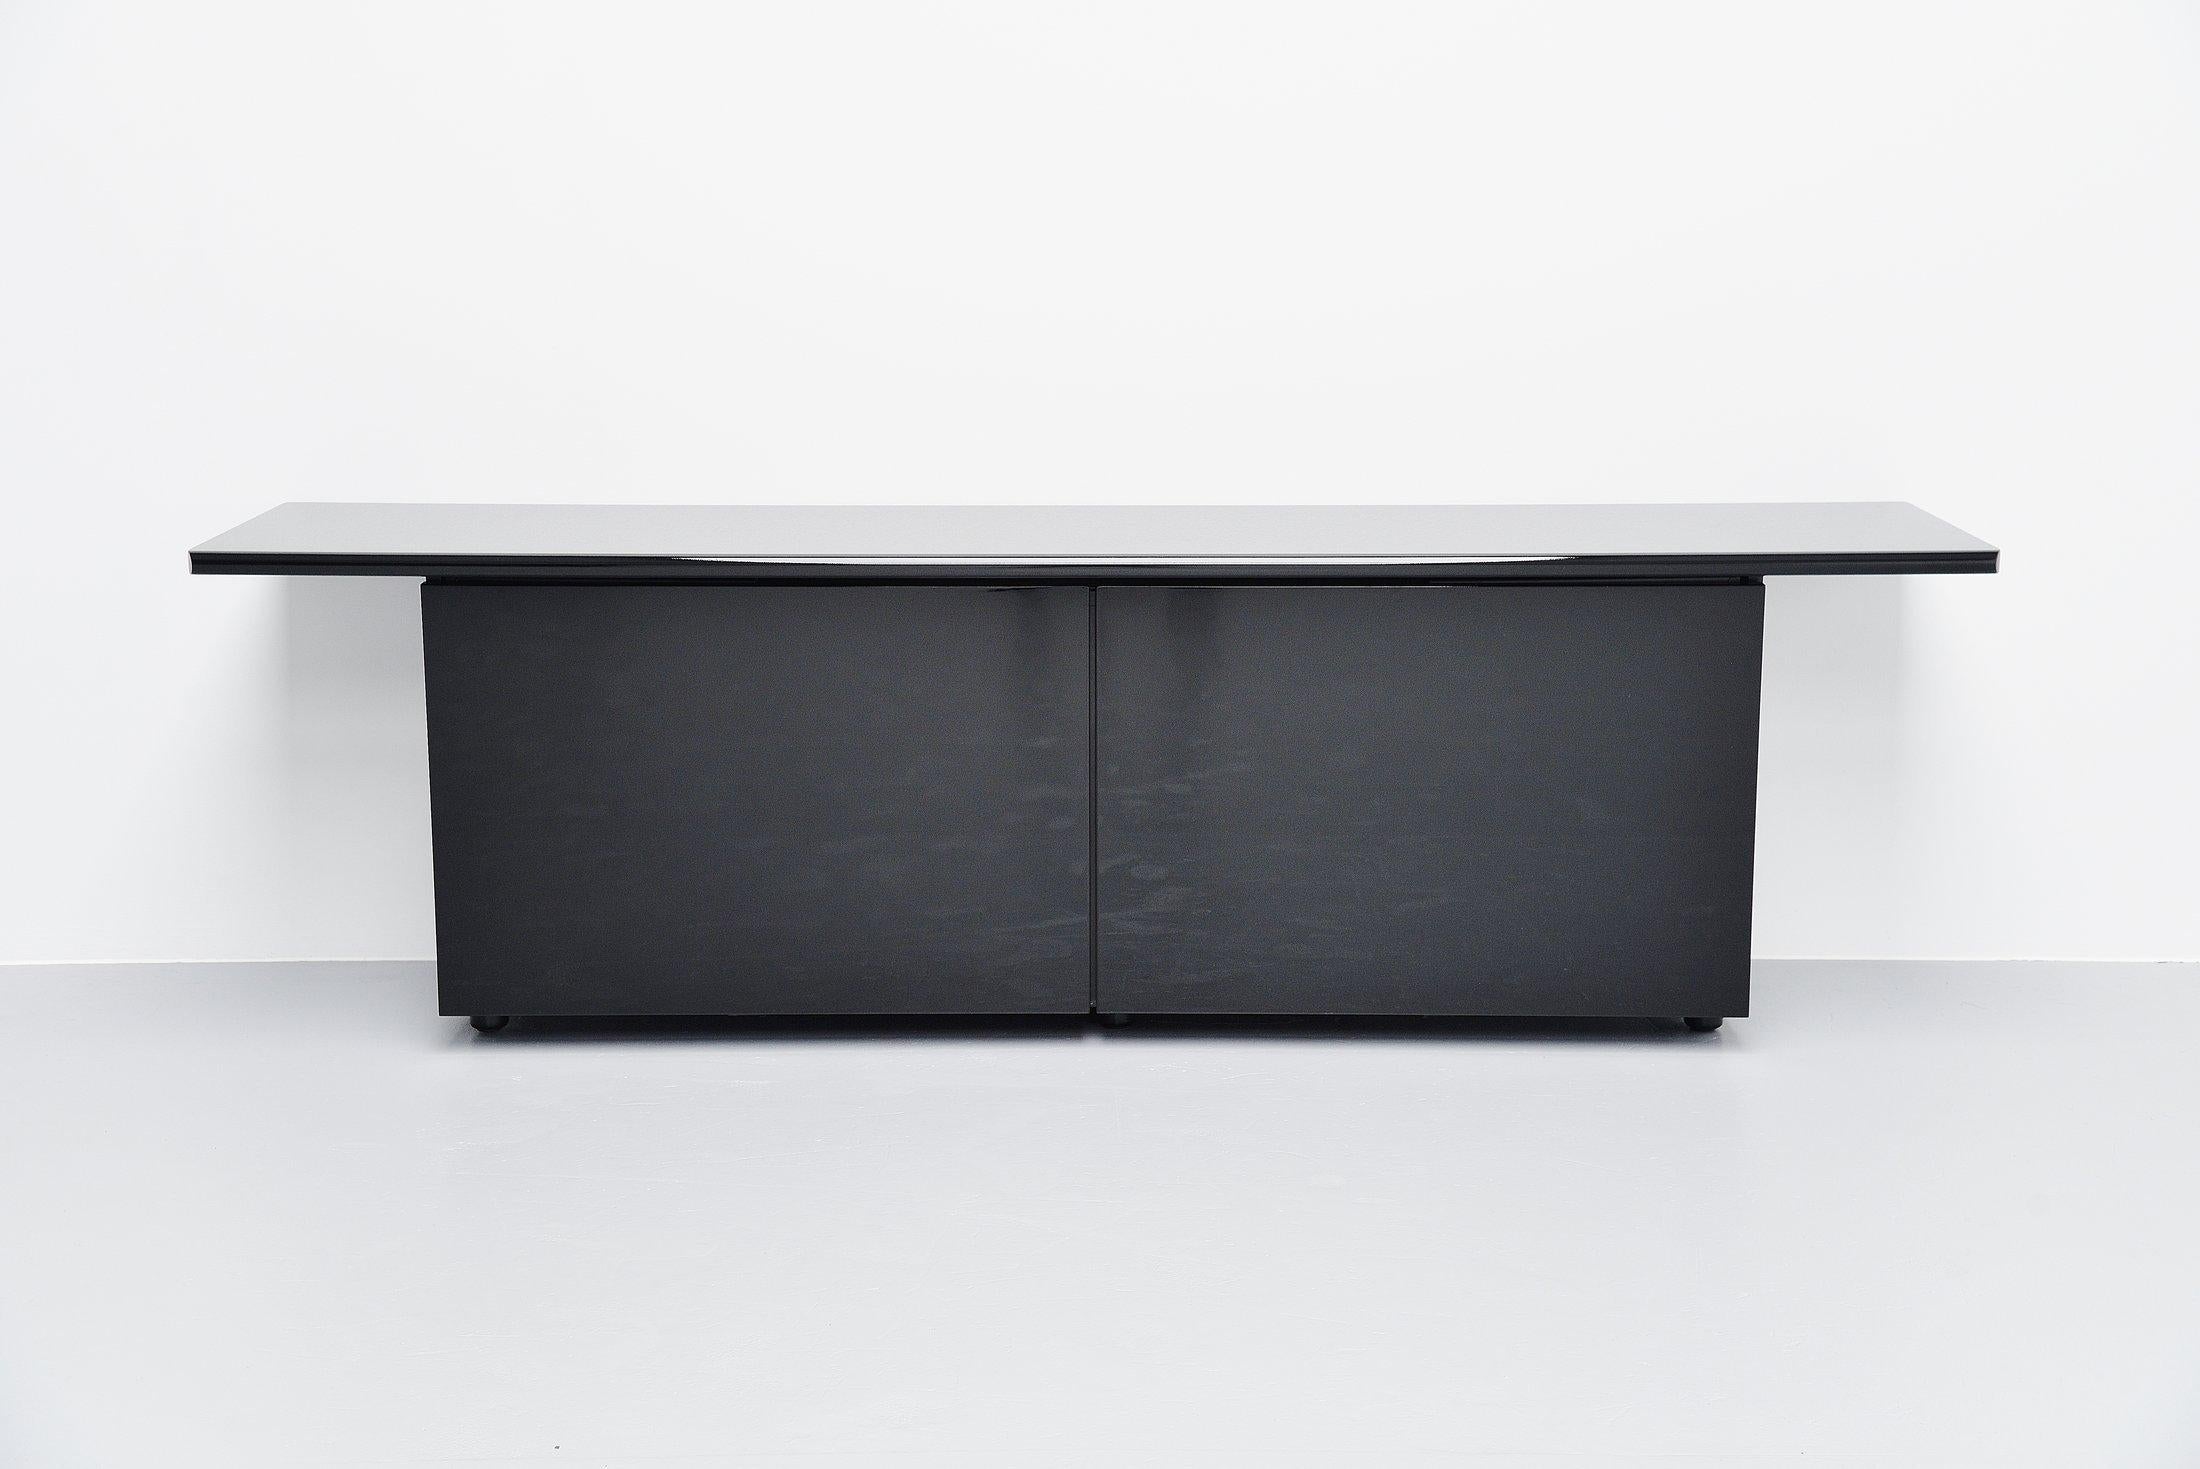 High quality credenza named 'Sheraton' designed by Giotto Stoppino and Lodovico Acerbis and manufactured by Acerbis International, Italy, 1977. This is for a black gloss version in very good condition. The credenza has 2 sliding doors with shelves